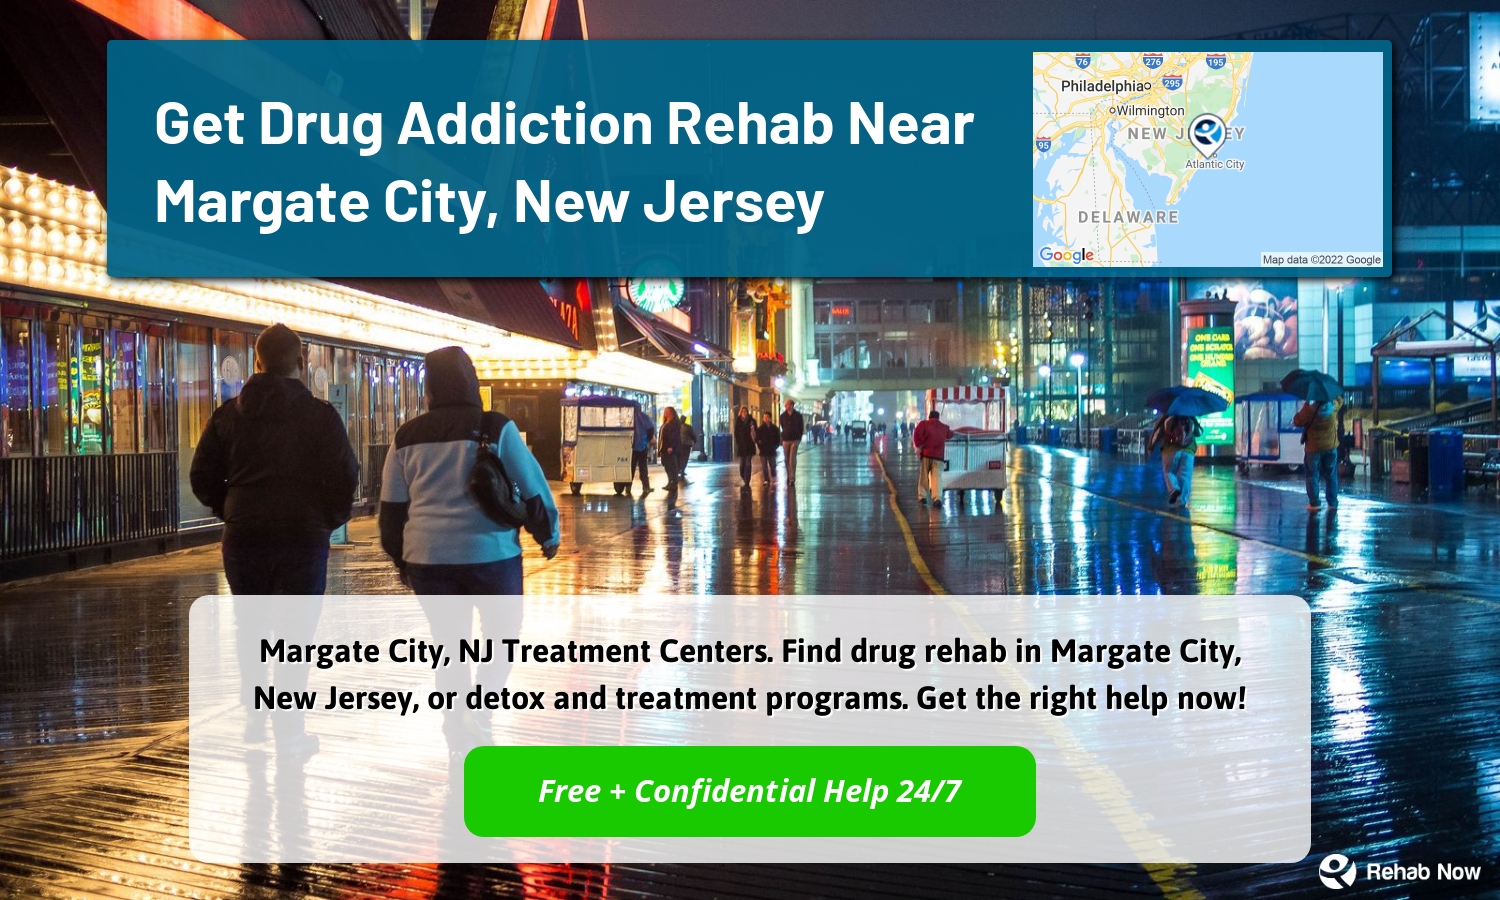 Margate City, NJ Treatment Centers. Find drug rehab in Margate City, New Jersey, or detox and treatment programs. Get the right help now!